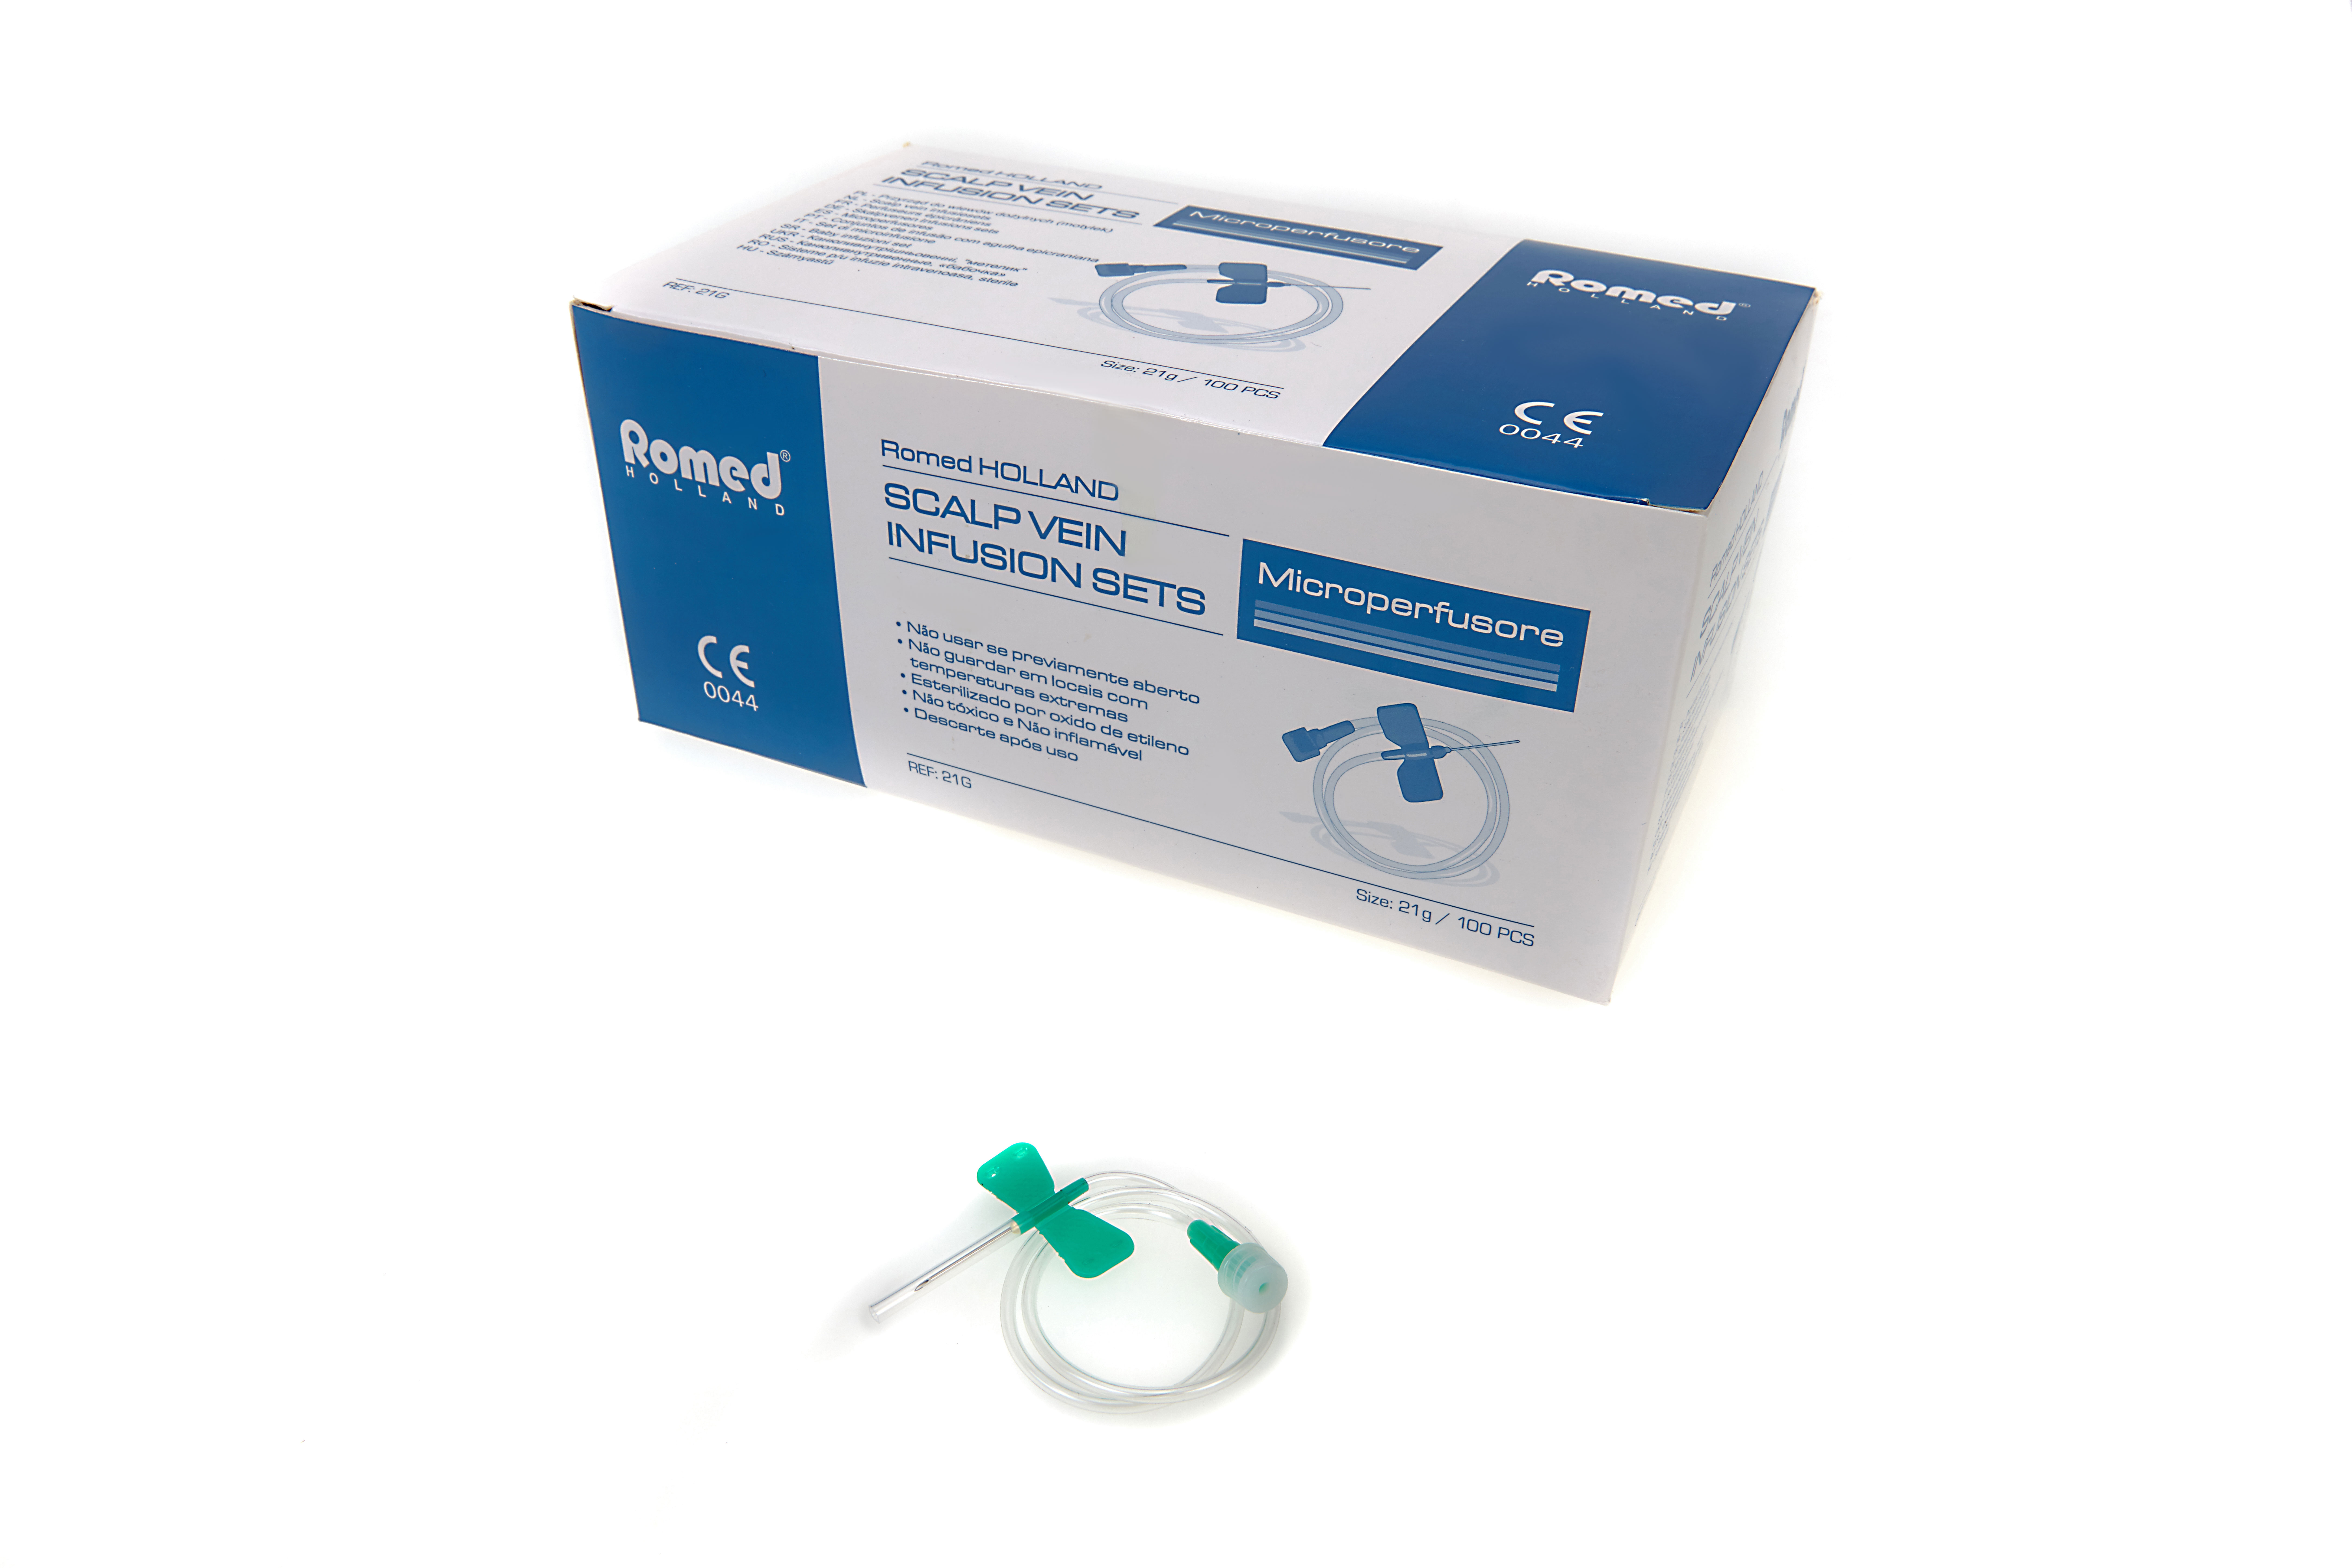 18G Romed scalp vein infusion sets, 18G, sterile per piece in a polybag, 100 pcs in an inner box, 10 x 100 pcs = 1.000 pcs in a carton.